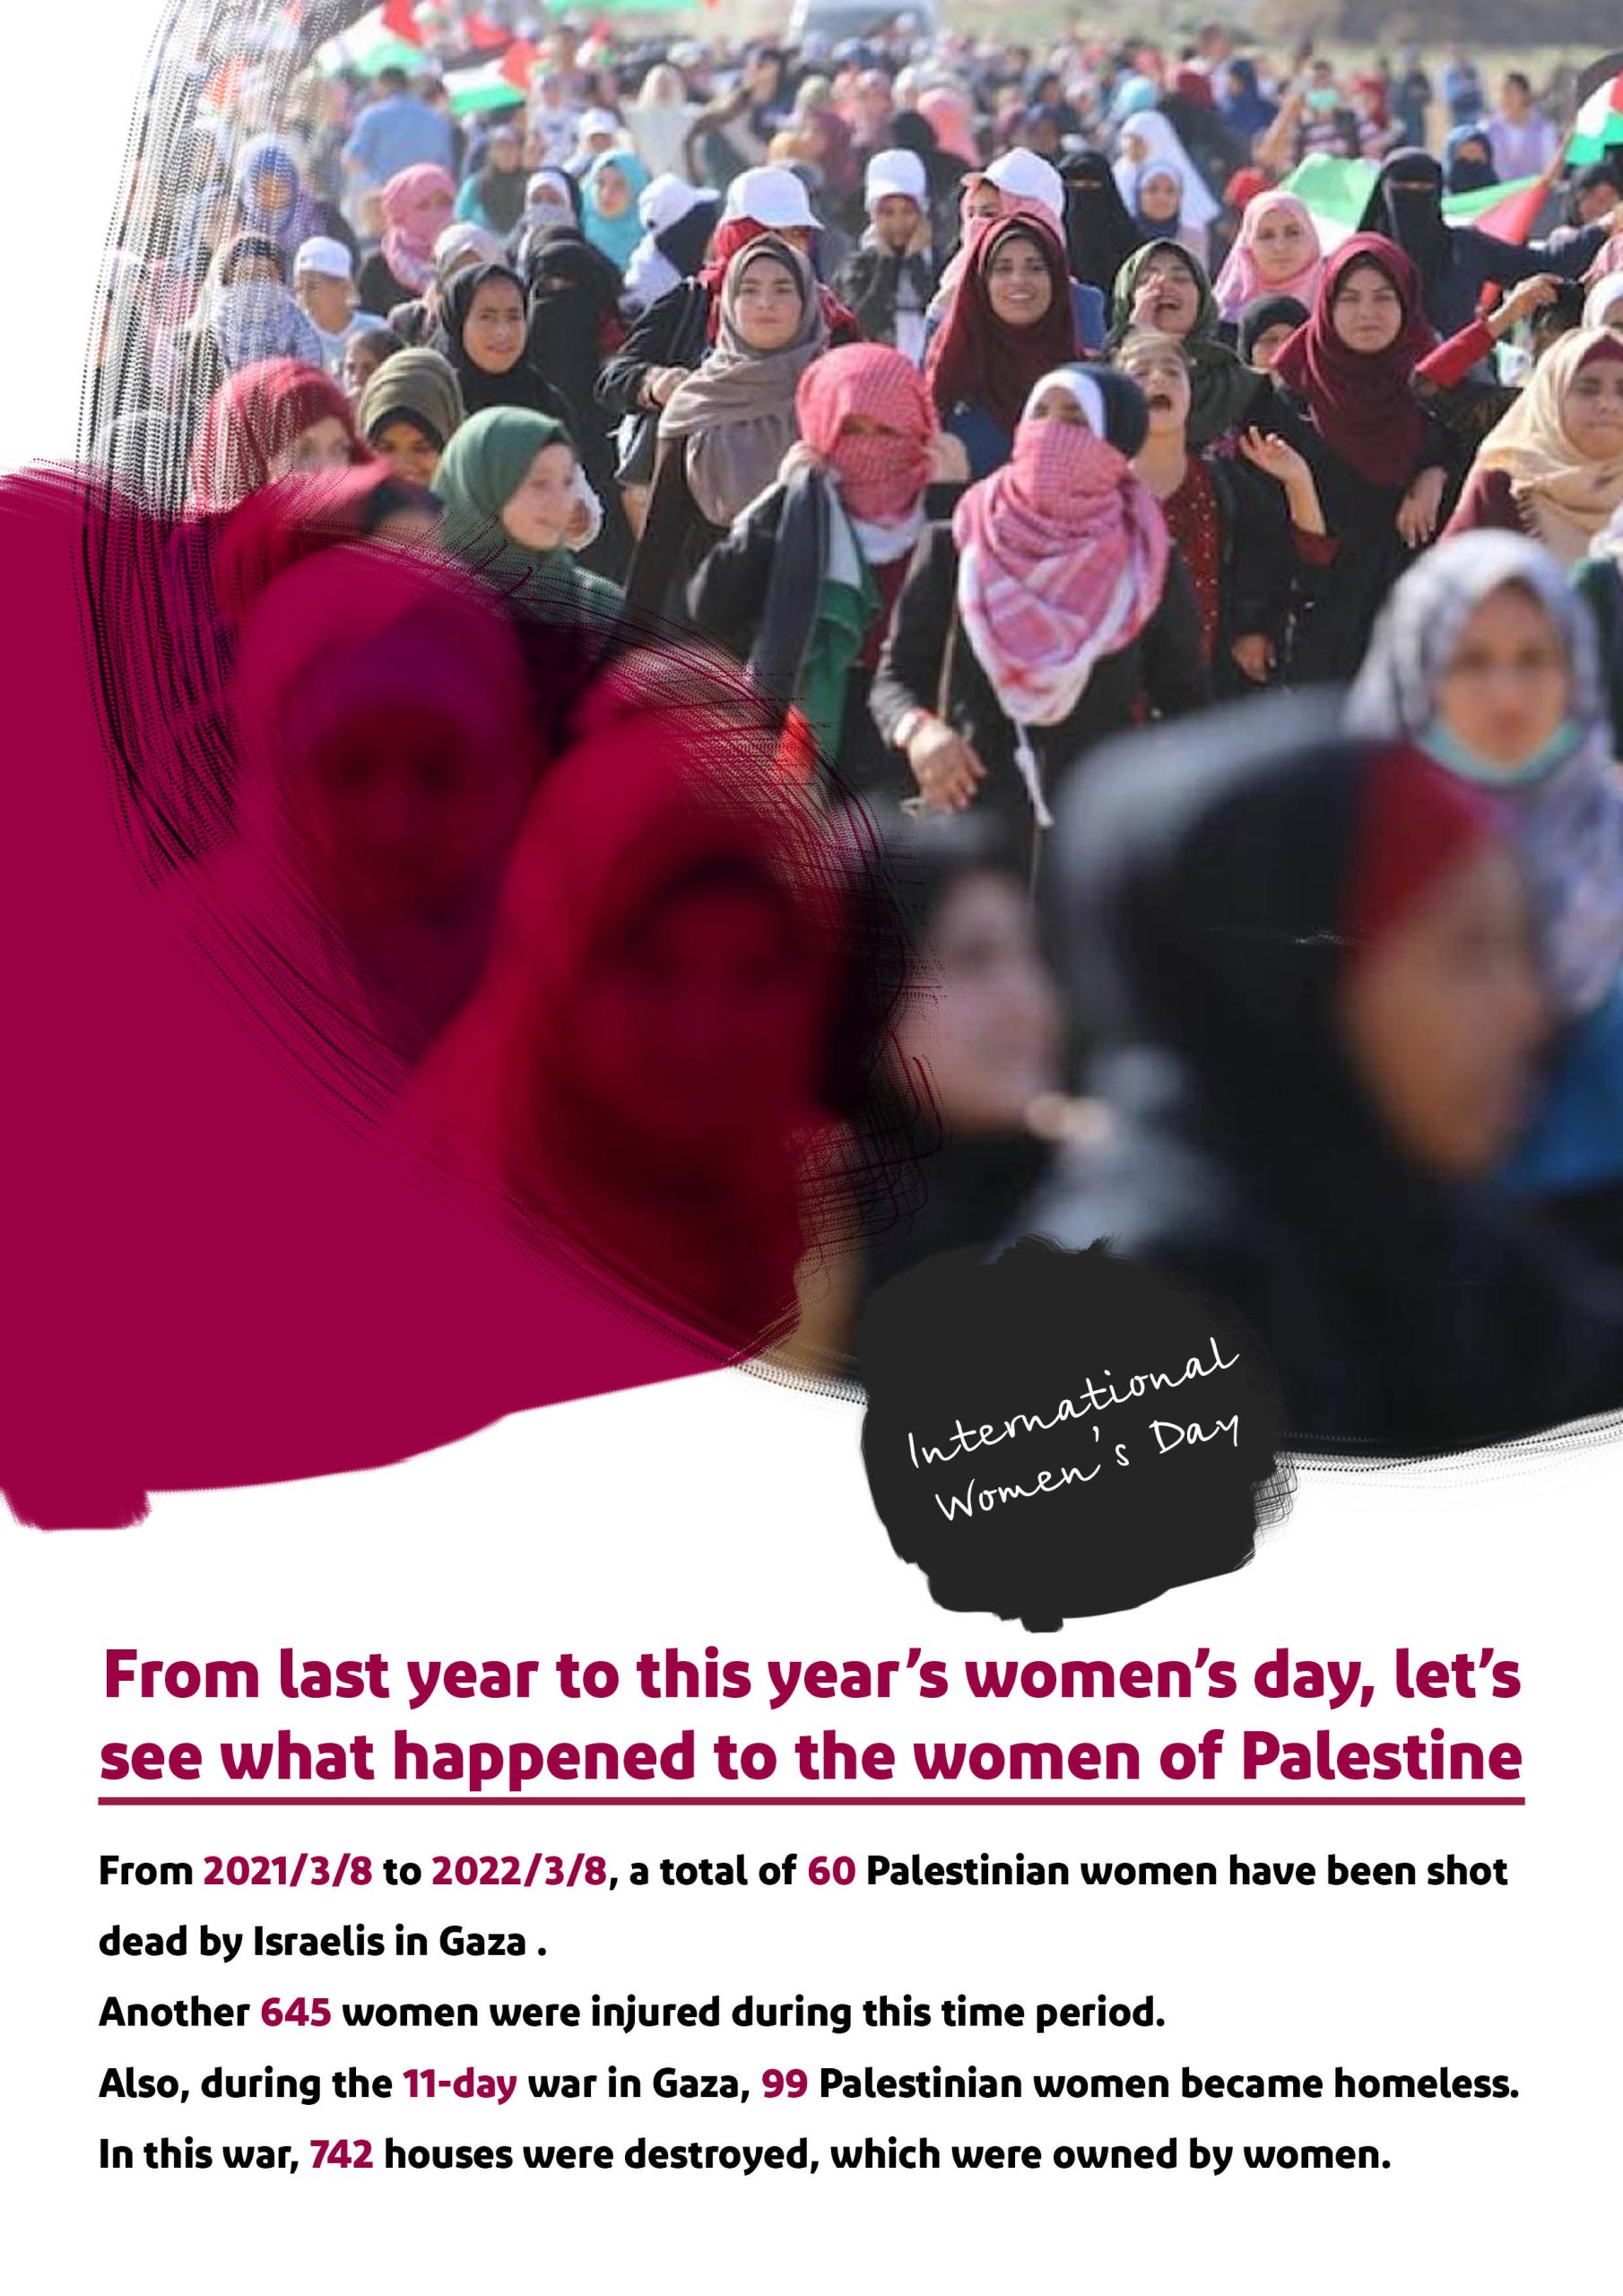 FROM LAST YEAR TO THIS YEAR’S INTERNATIONAL WOMEN’S DAY, LET’S SEE WHAT HAPPENED TO THE WOMEN OF PALESTINE